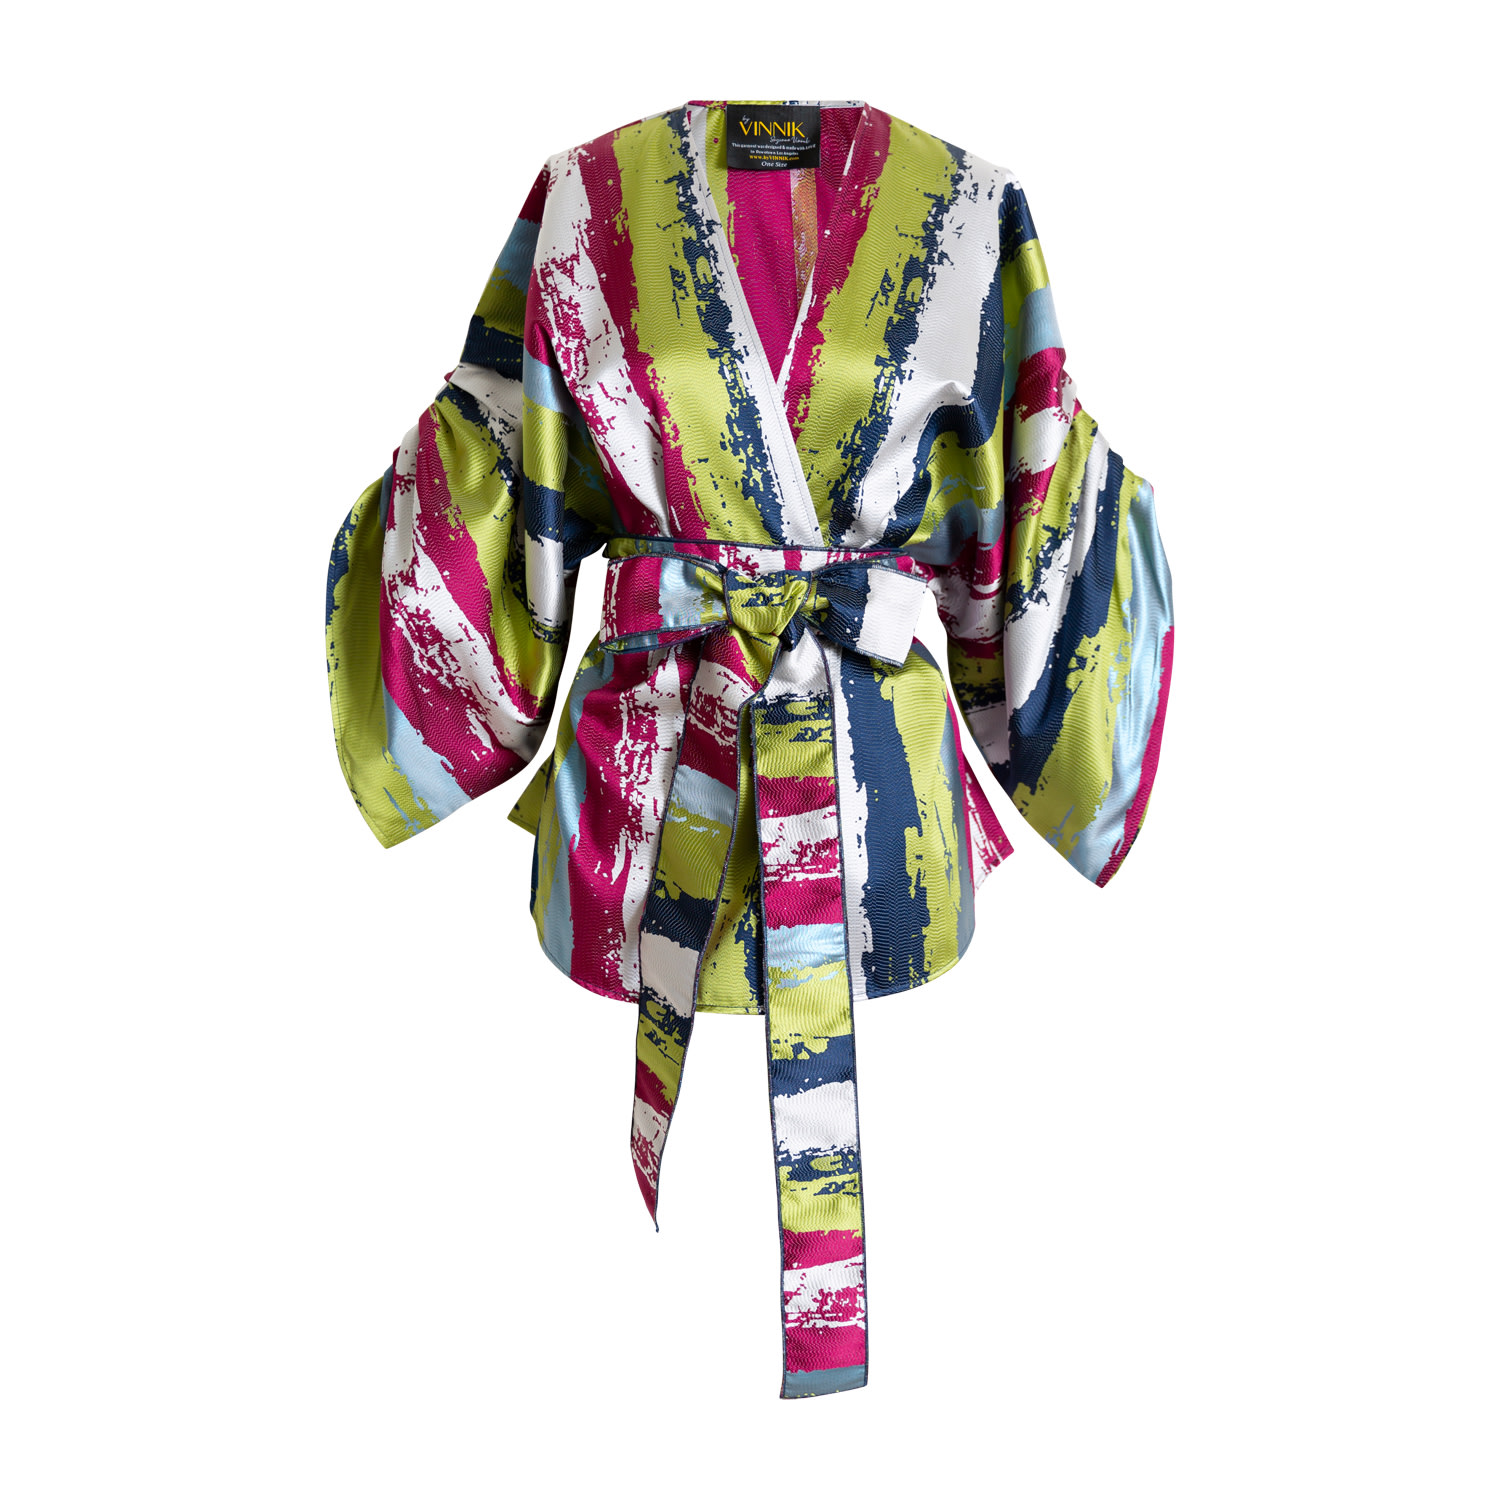 Women’s Jacquard Ruched Sleeve Multicolored Theater Jacket- Land One Size Byvinnik